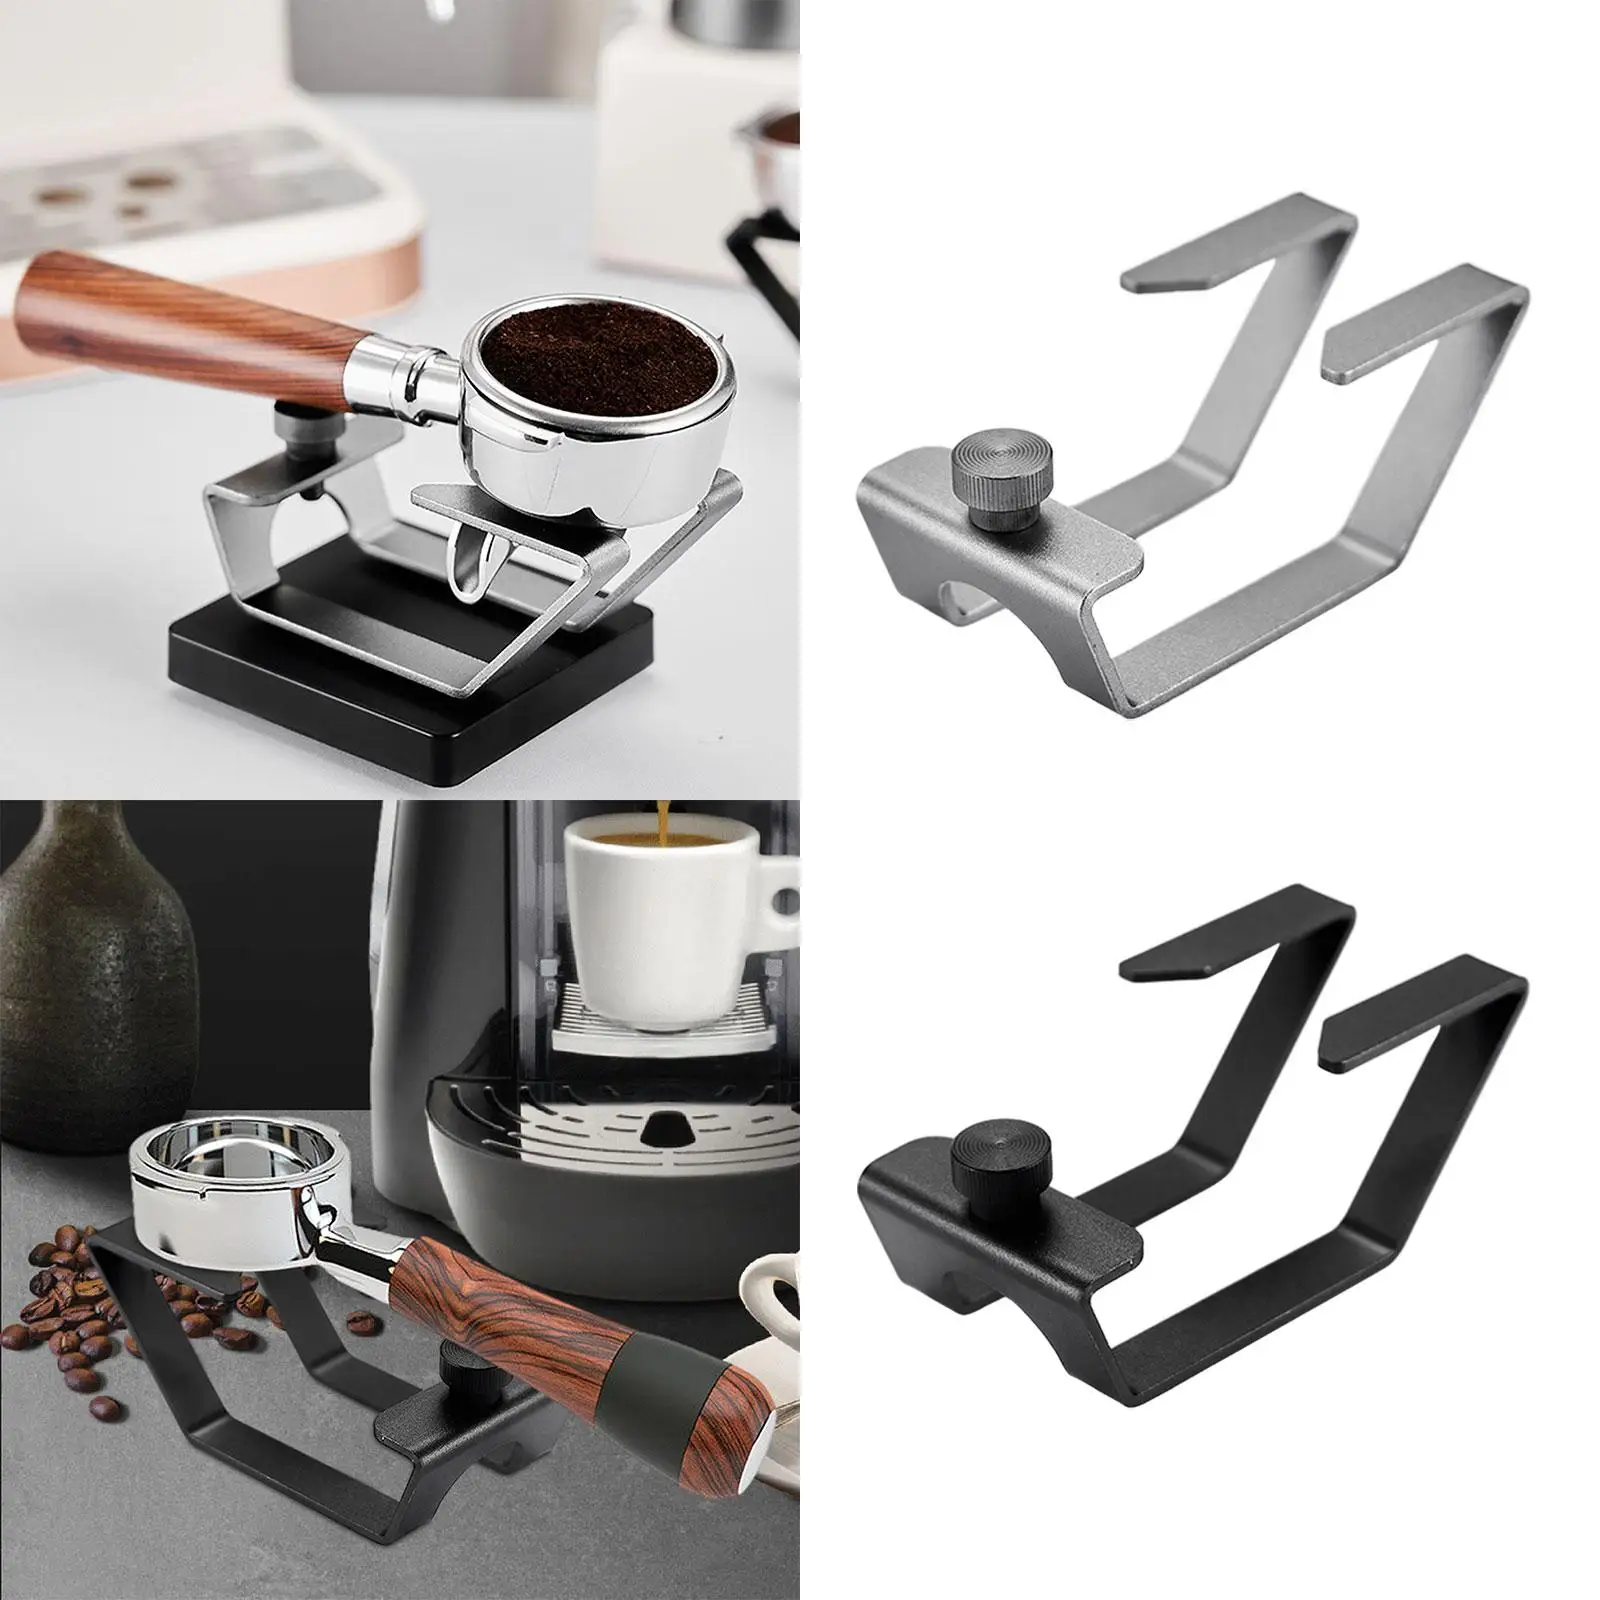 Coffee Tamper Stand Aluminum Espresso Holder Weighing Rack for Espresso Machines Portafilter Single Spout Double Spout Accessory